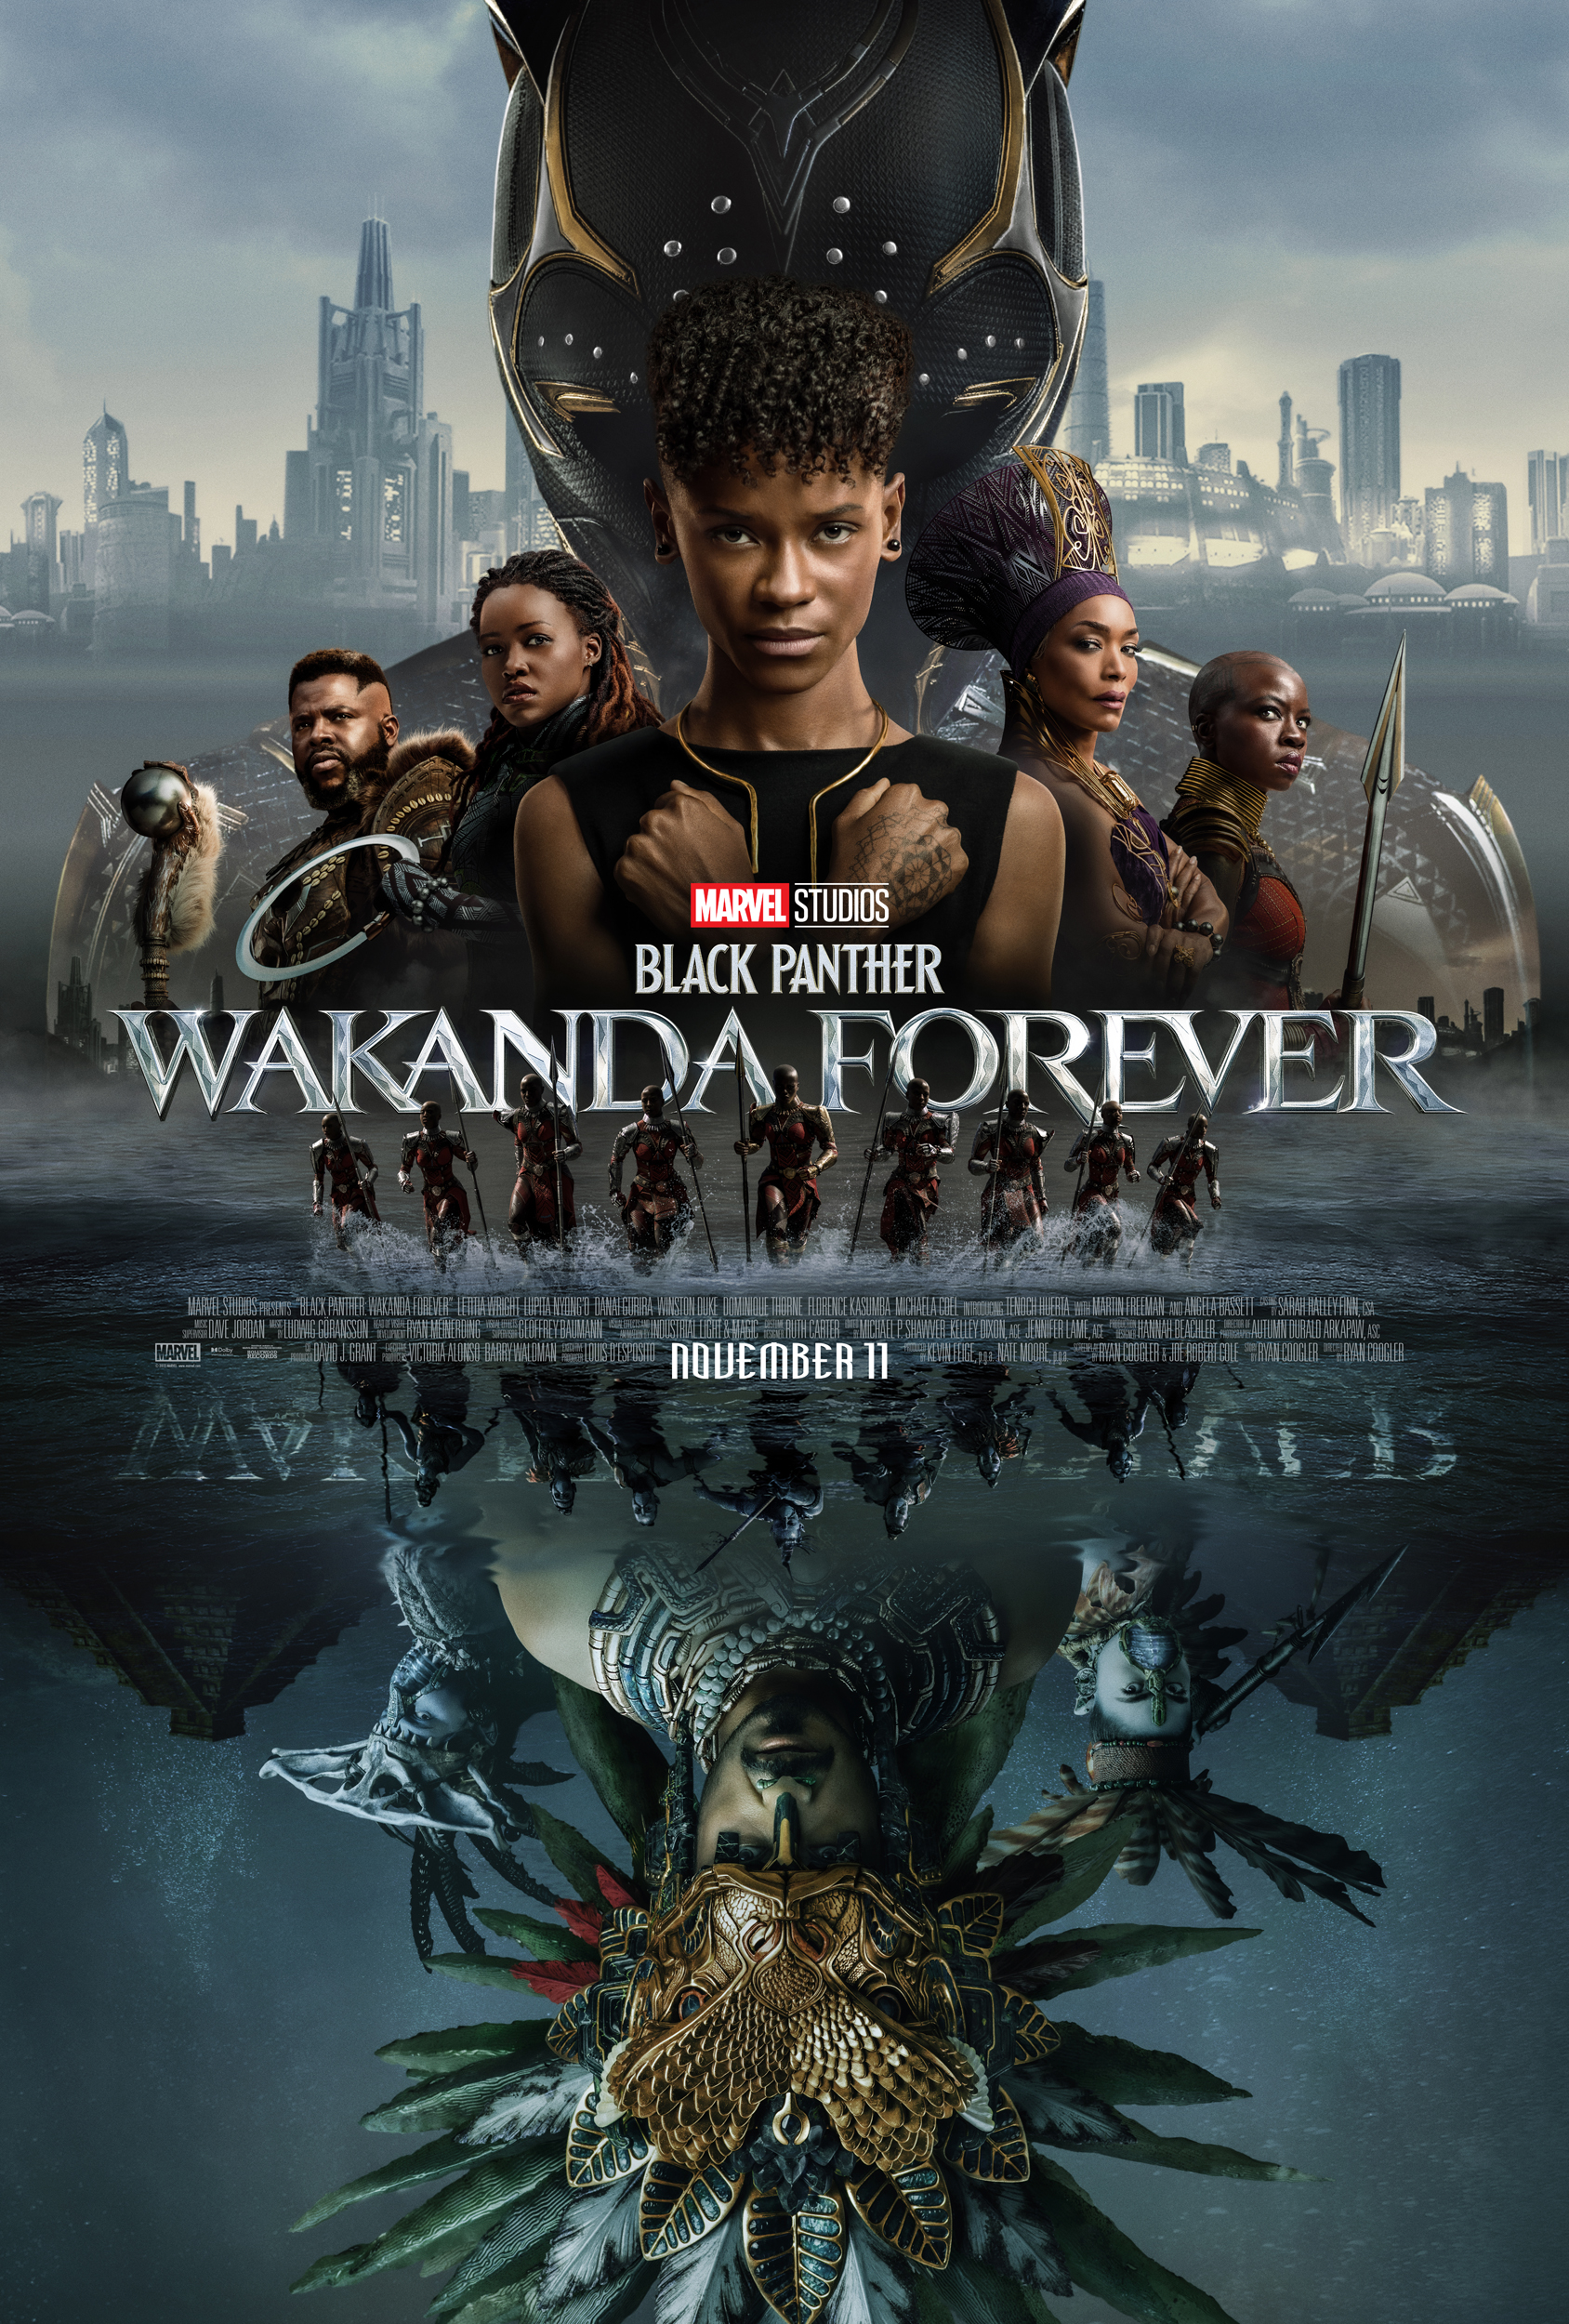 VFX Studio Perception uses Premiere Pro and After Effects to create  Marvel's Black Panther: Wakanda Forever title sequences | Adobe Blog